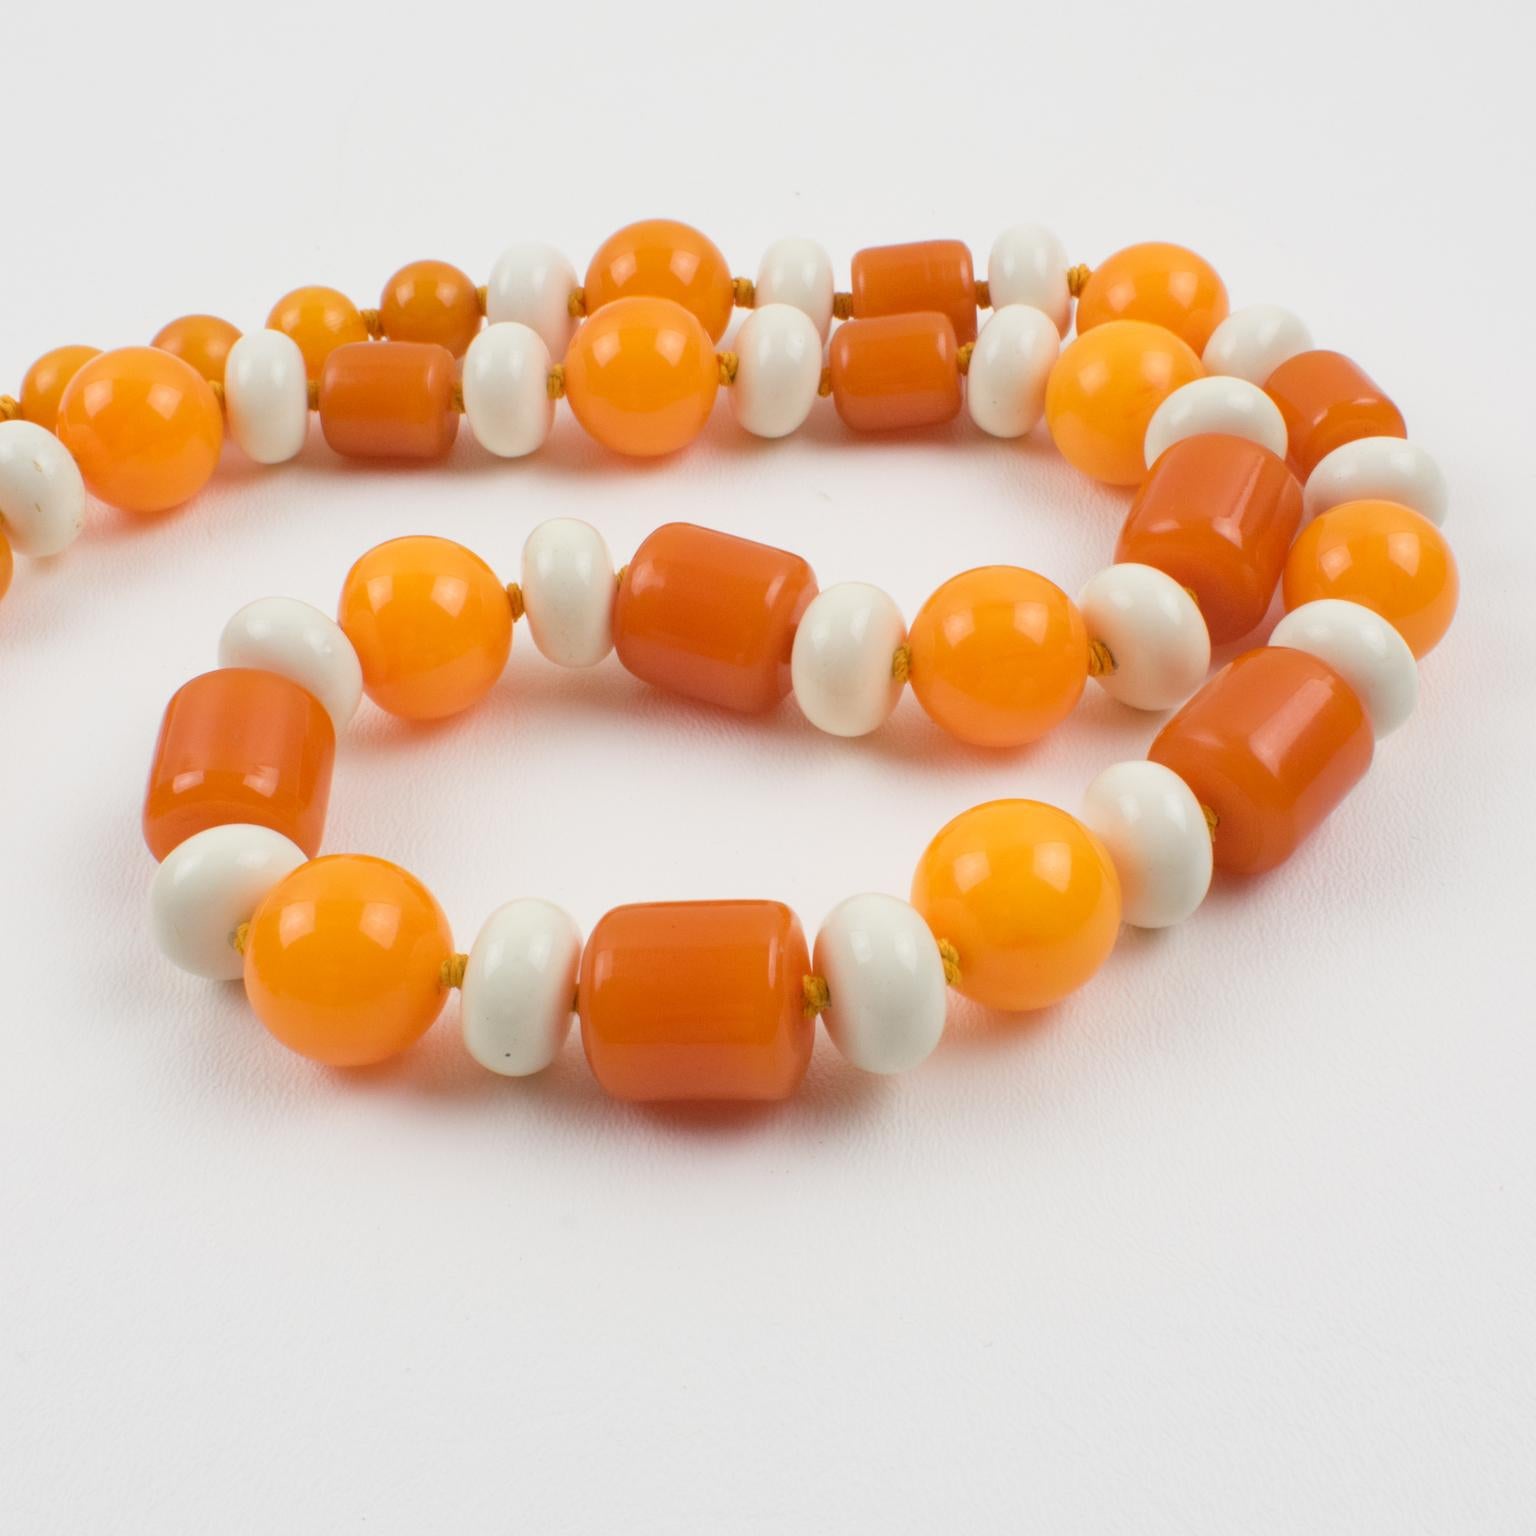 Bakelite and Lucite Long Necklace Orange and White Colors For Sale 5